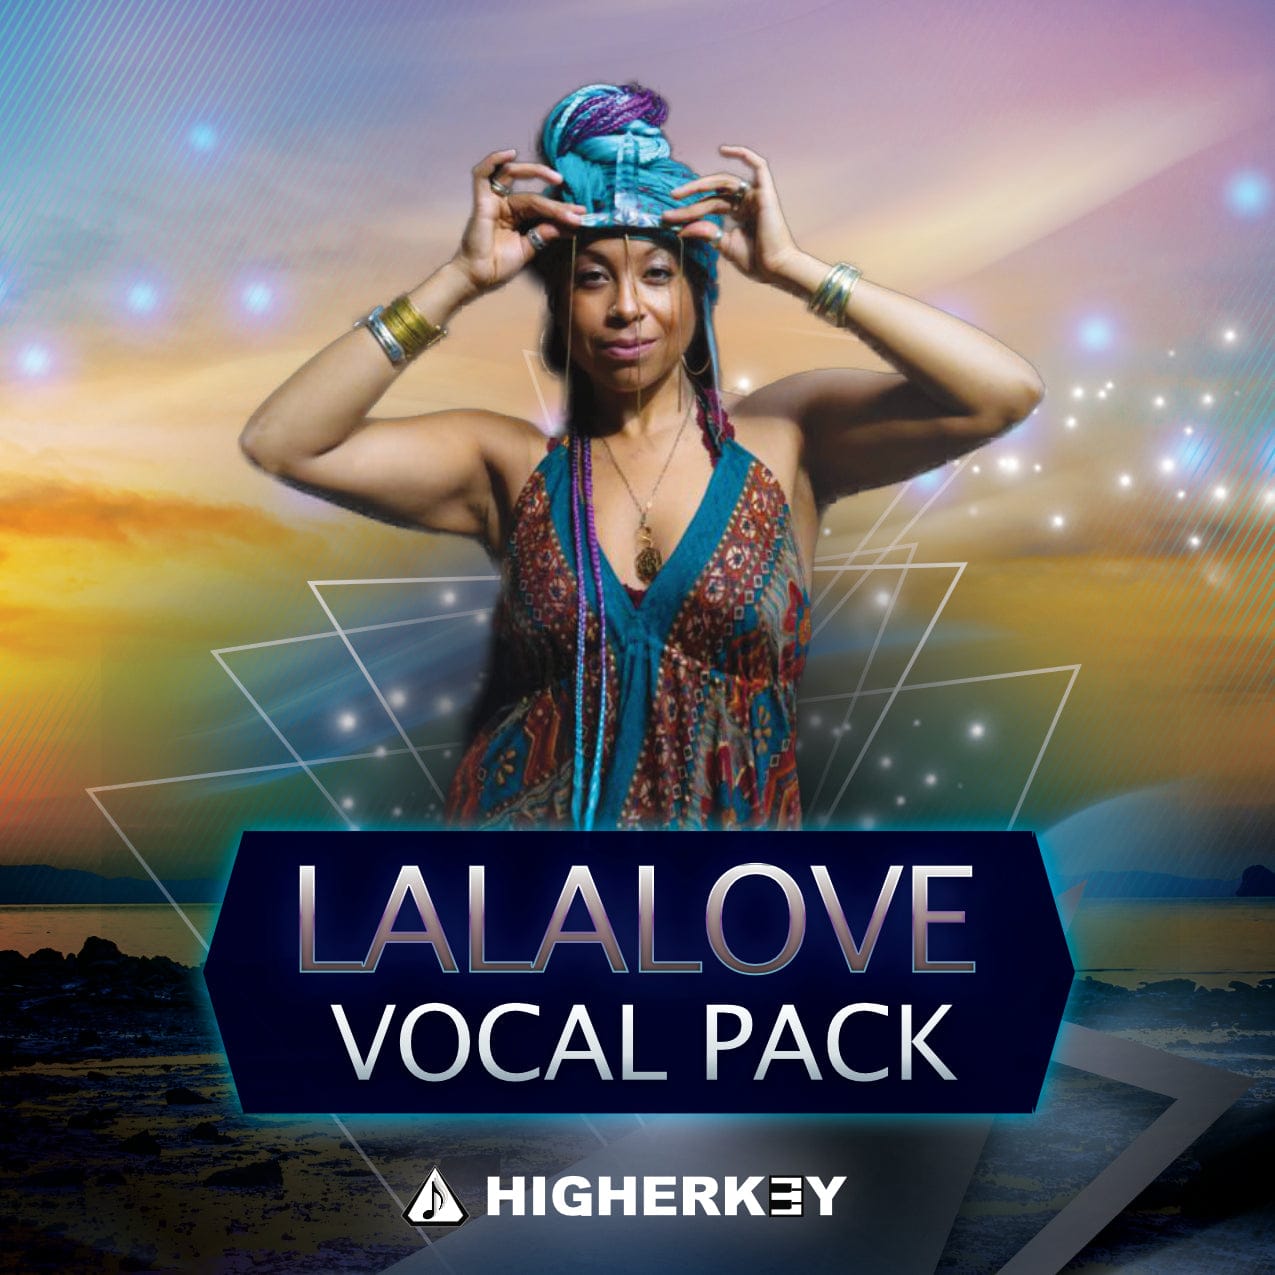 LALALove Vocal Pack